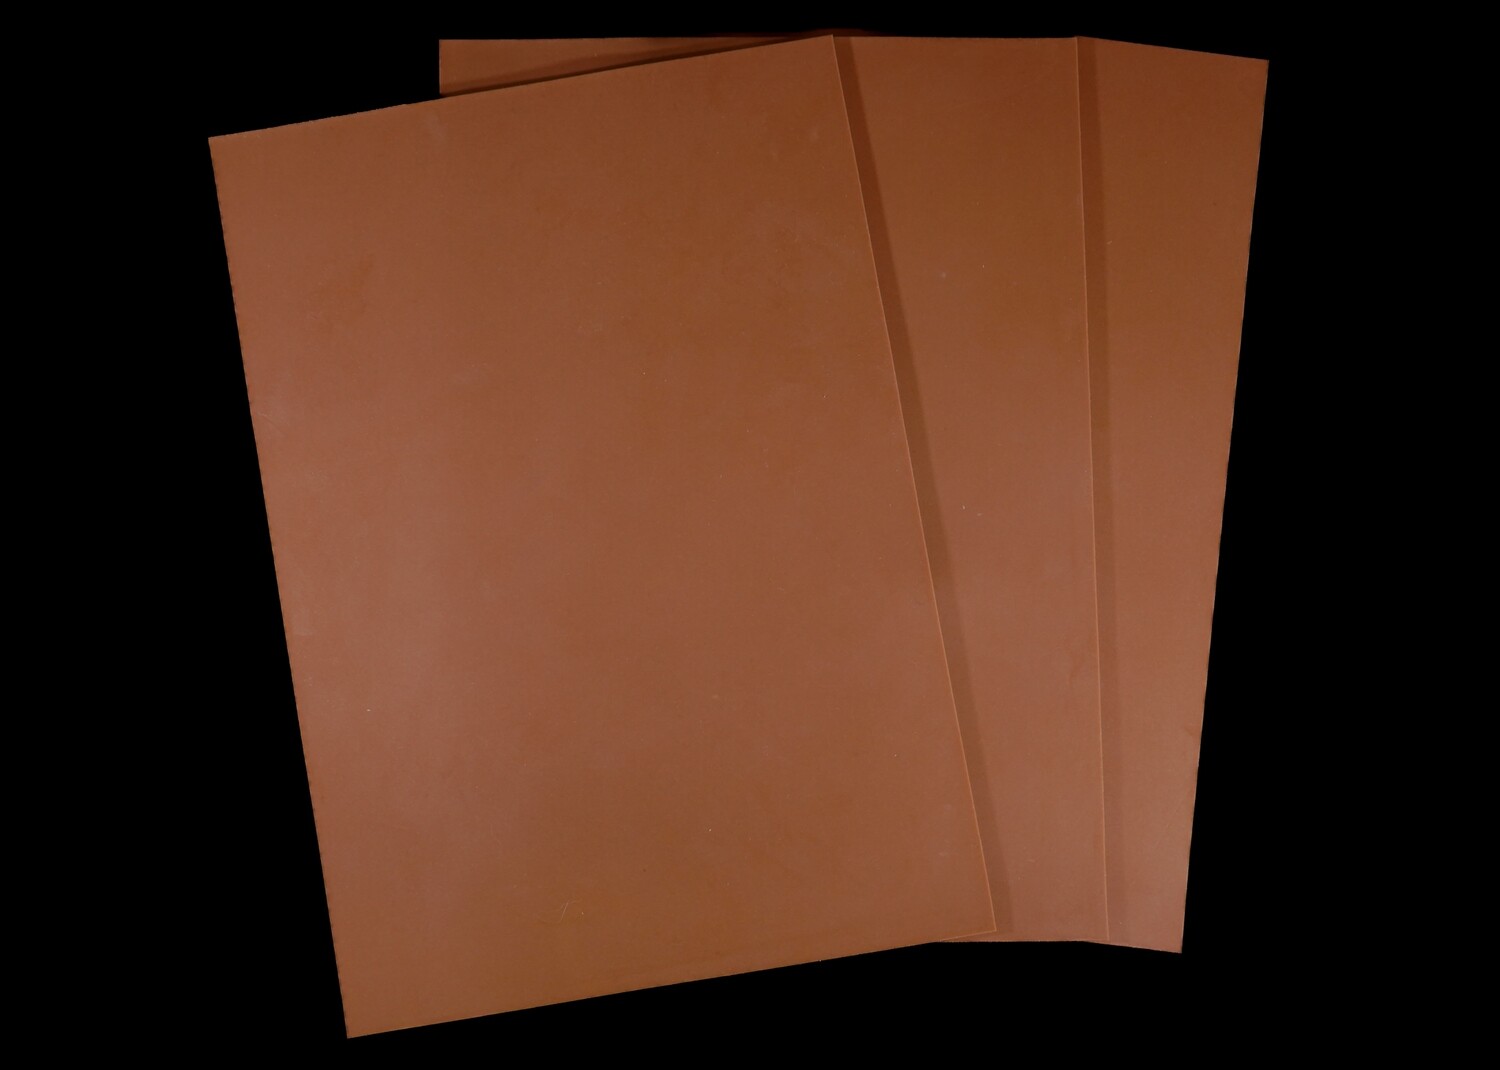 3 x A4 Reelskin sheet (Darker tone) £32.99 (discount codes not applicable to this offer)